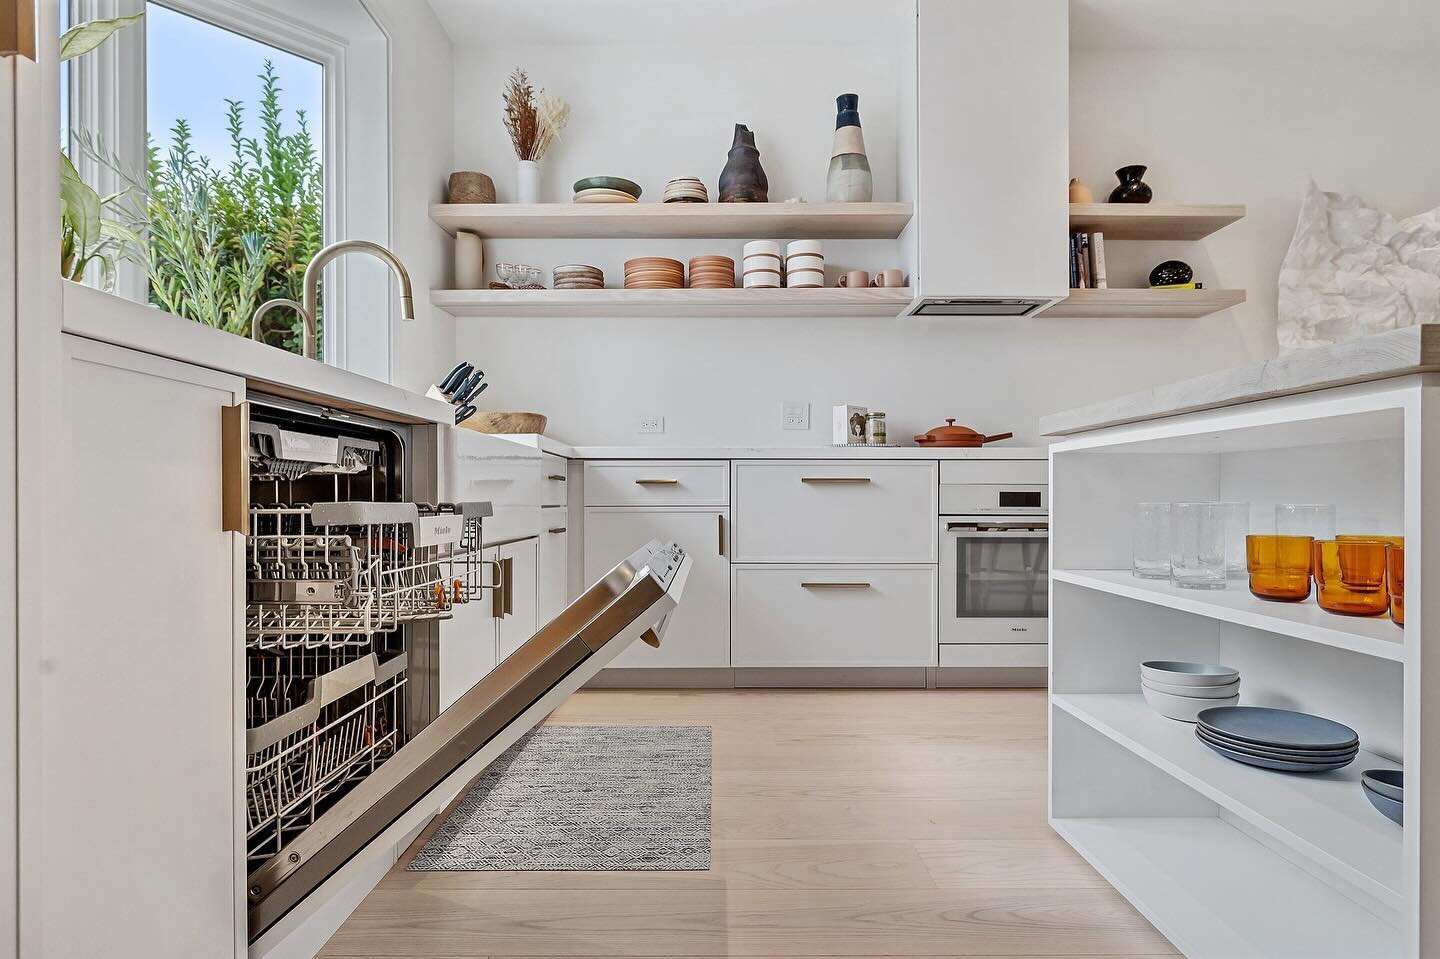 An airy kitchen makes cooking more fun, we swear. 

See more of this home renovation: #WaybackCottage

Dishwasher by @miele_com 
Counters by @caesarstoneus 
Steam oven by @fisherpaykel 

#BlueTruckStudio #ResidentialDesign #SanFranciscoArchitect #San